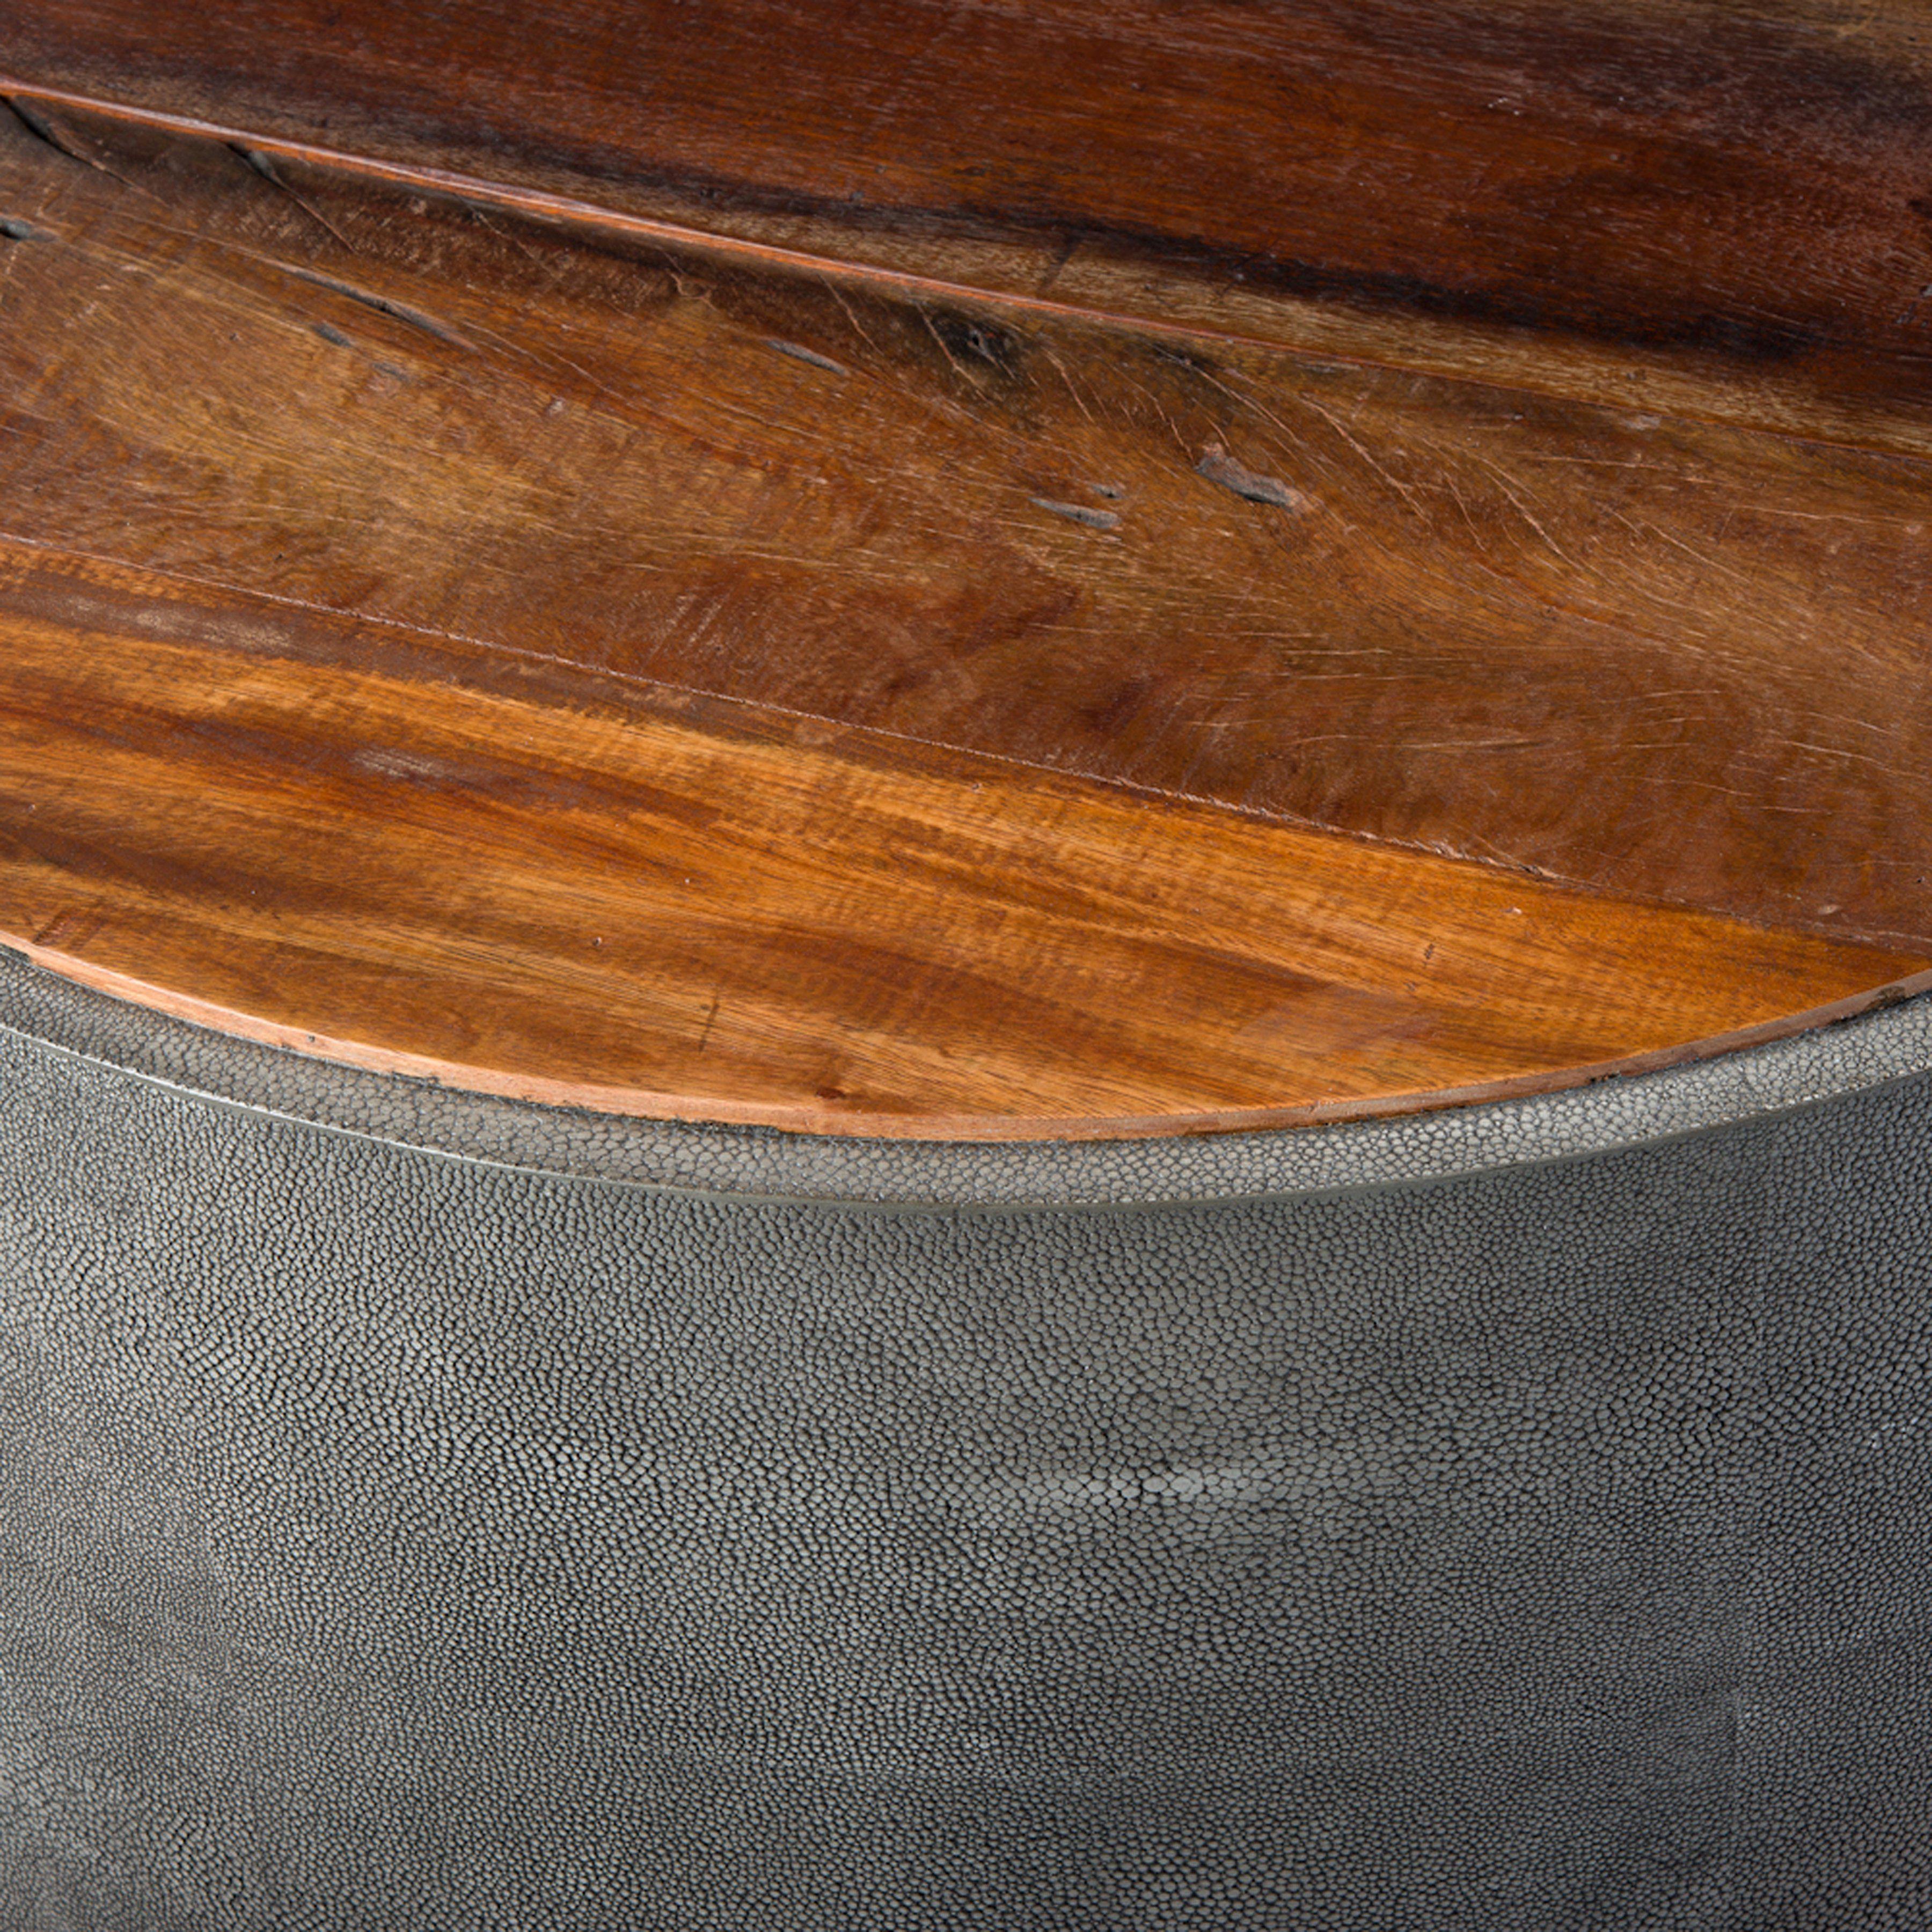 Four Hands FURNITURE - Axel Round Coffee Table